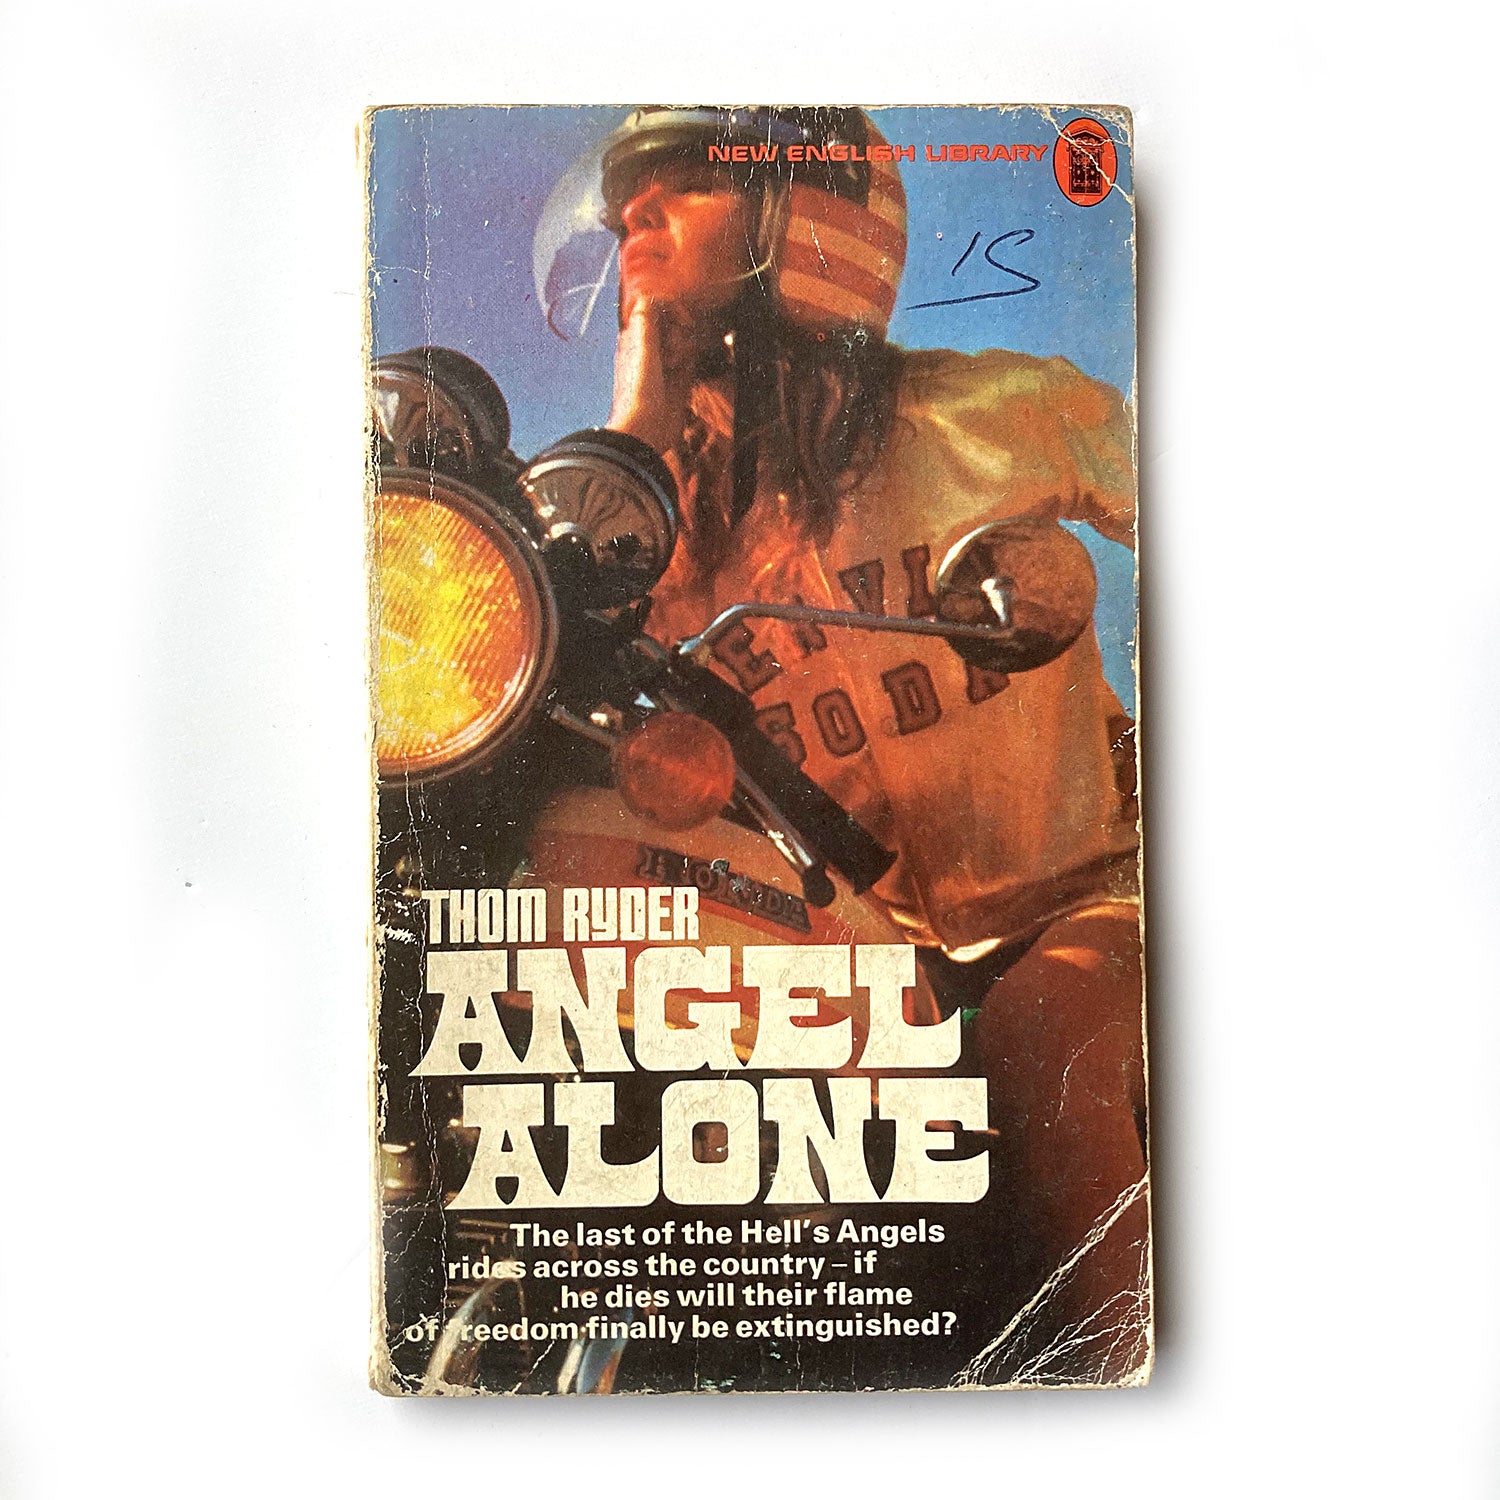 Angel Alone by Thom Ryder, first edition New English Library paperback, 1975